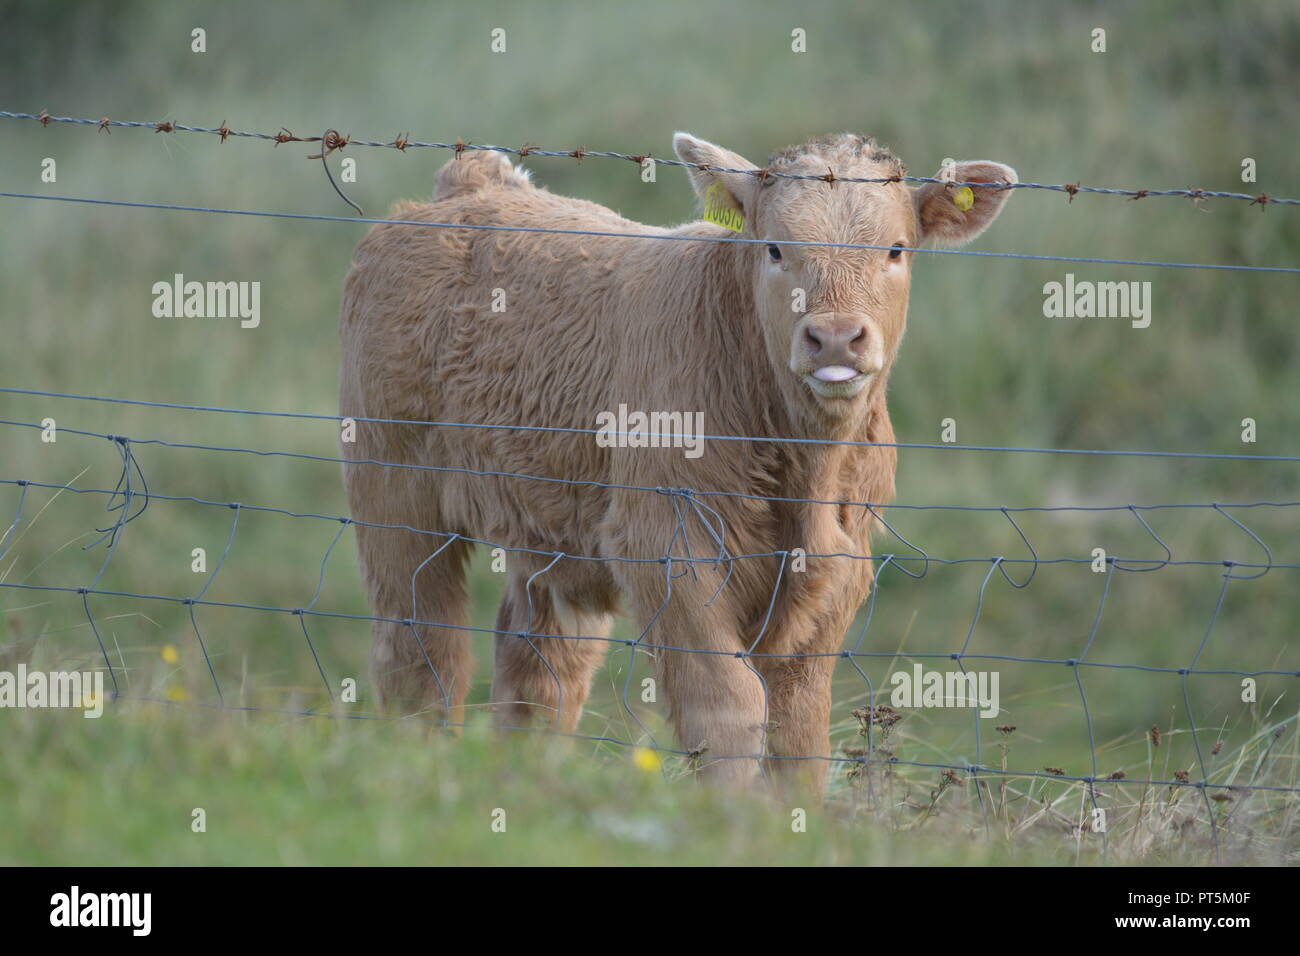 Close up of highland cattle young calf calves in a grassy field behind barbed wire fence near Tarbert on the Isle of Harris Outer Hebrides Scotland UK Stock Photo